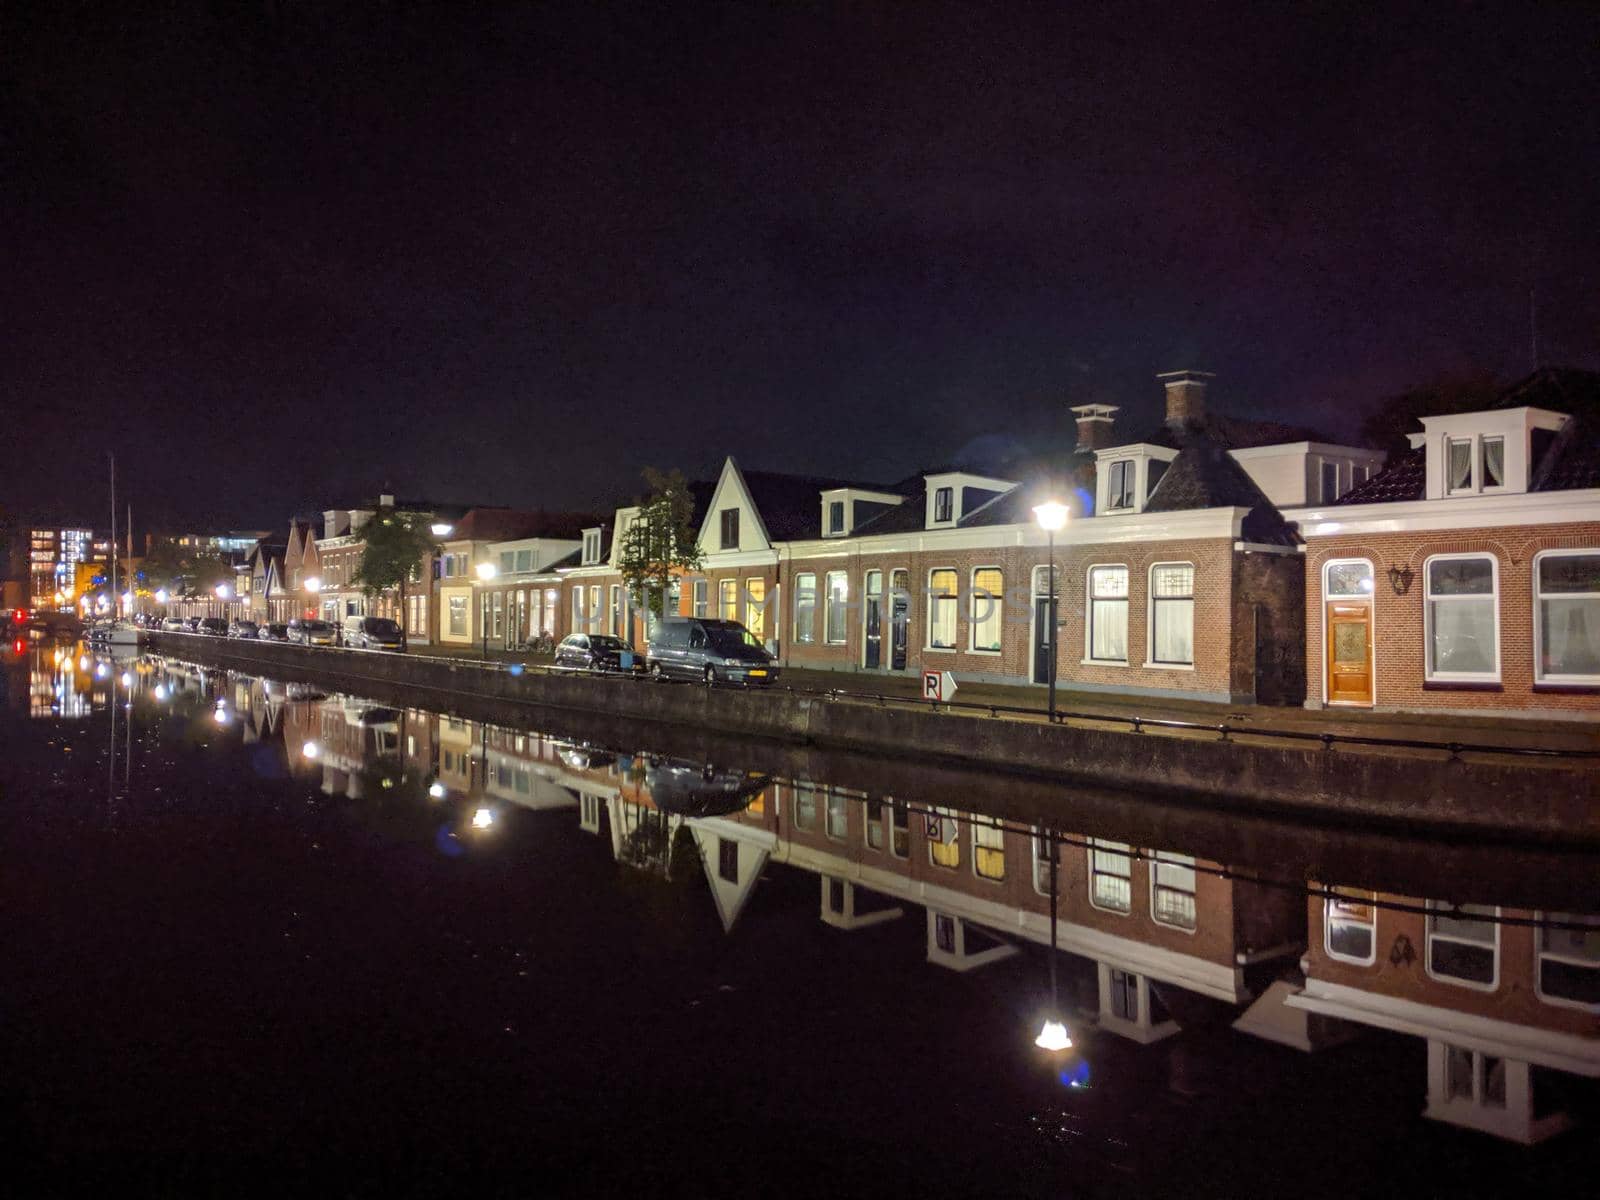 Housing along the canal at night in Sneek by traveltelly